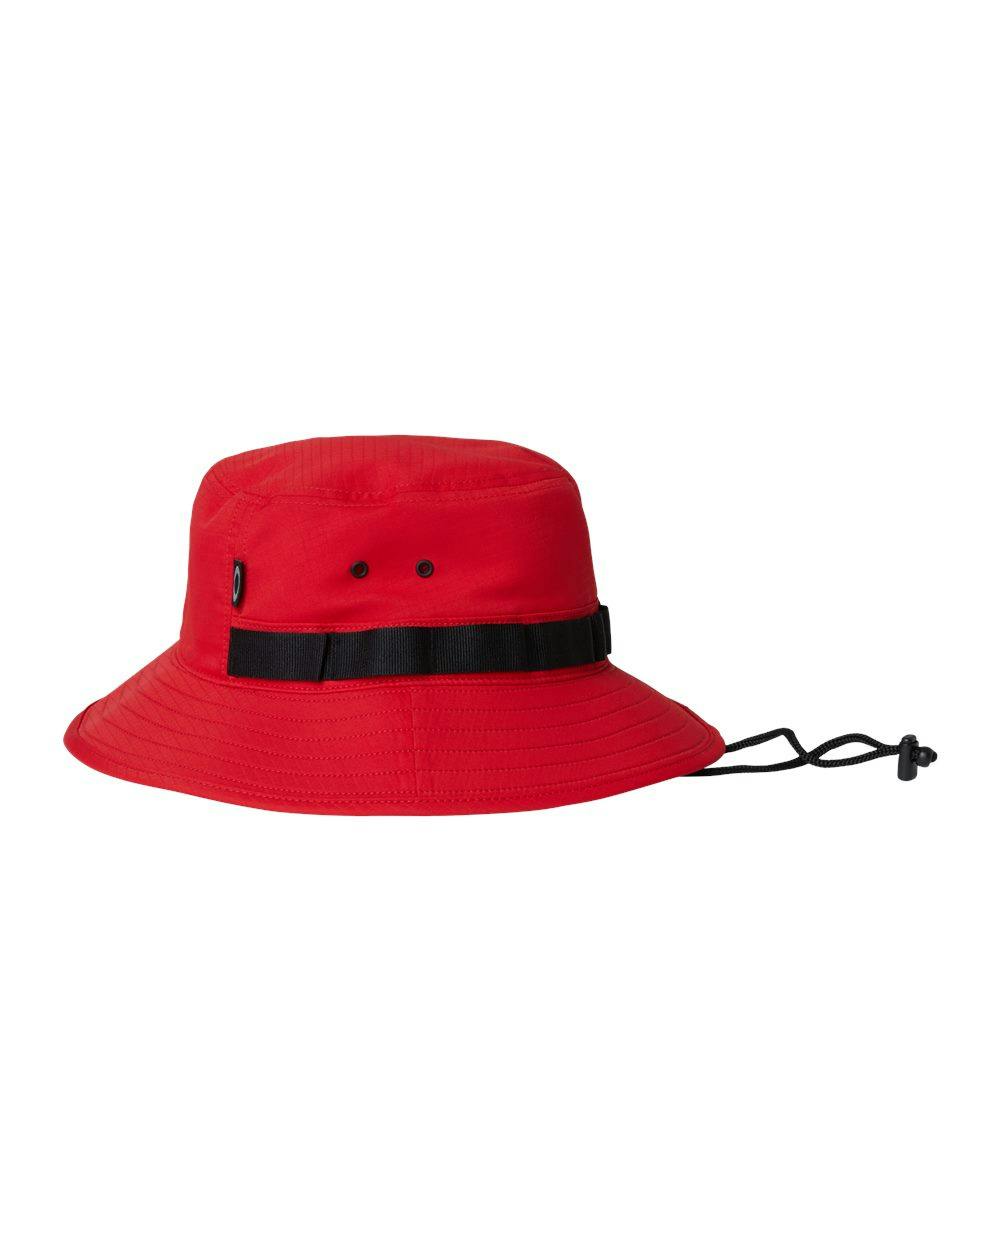 Image for Team Issue Bucket Hat - FOS900831